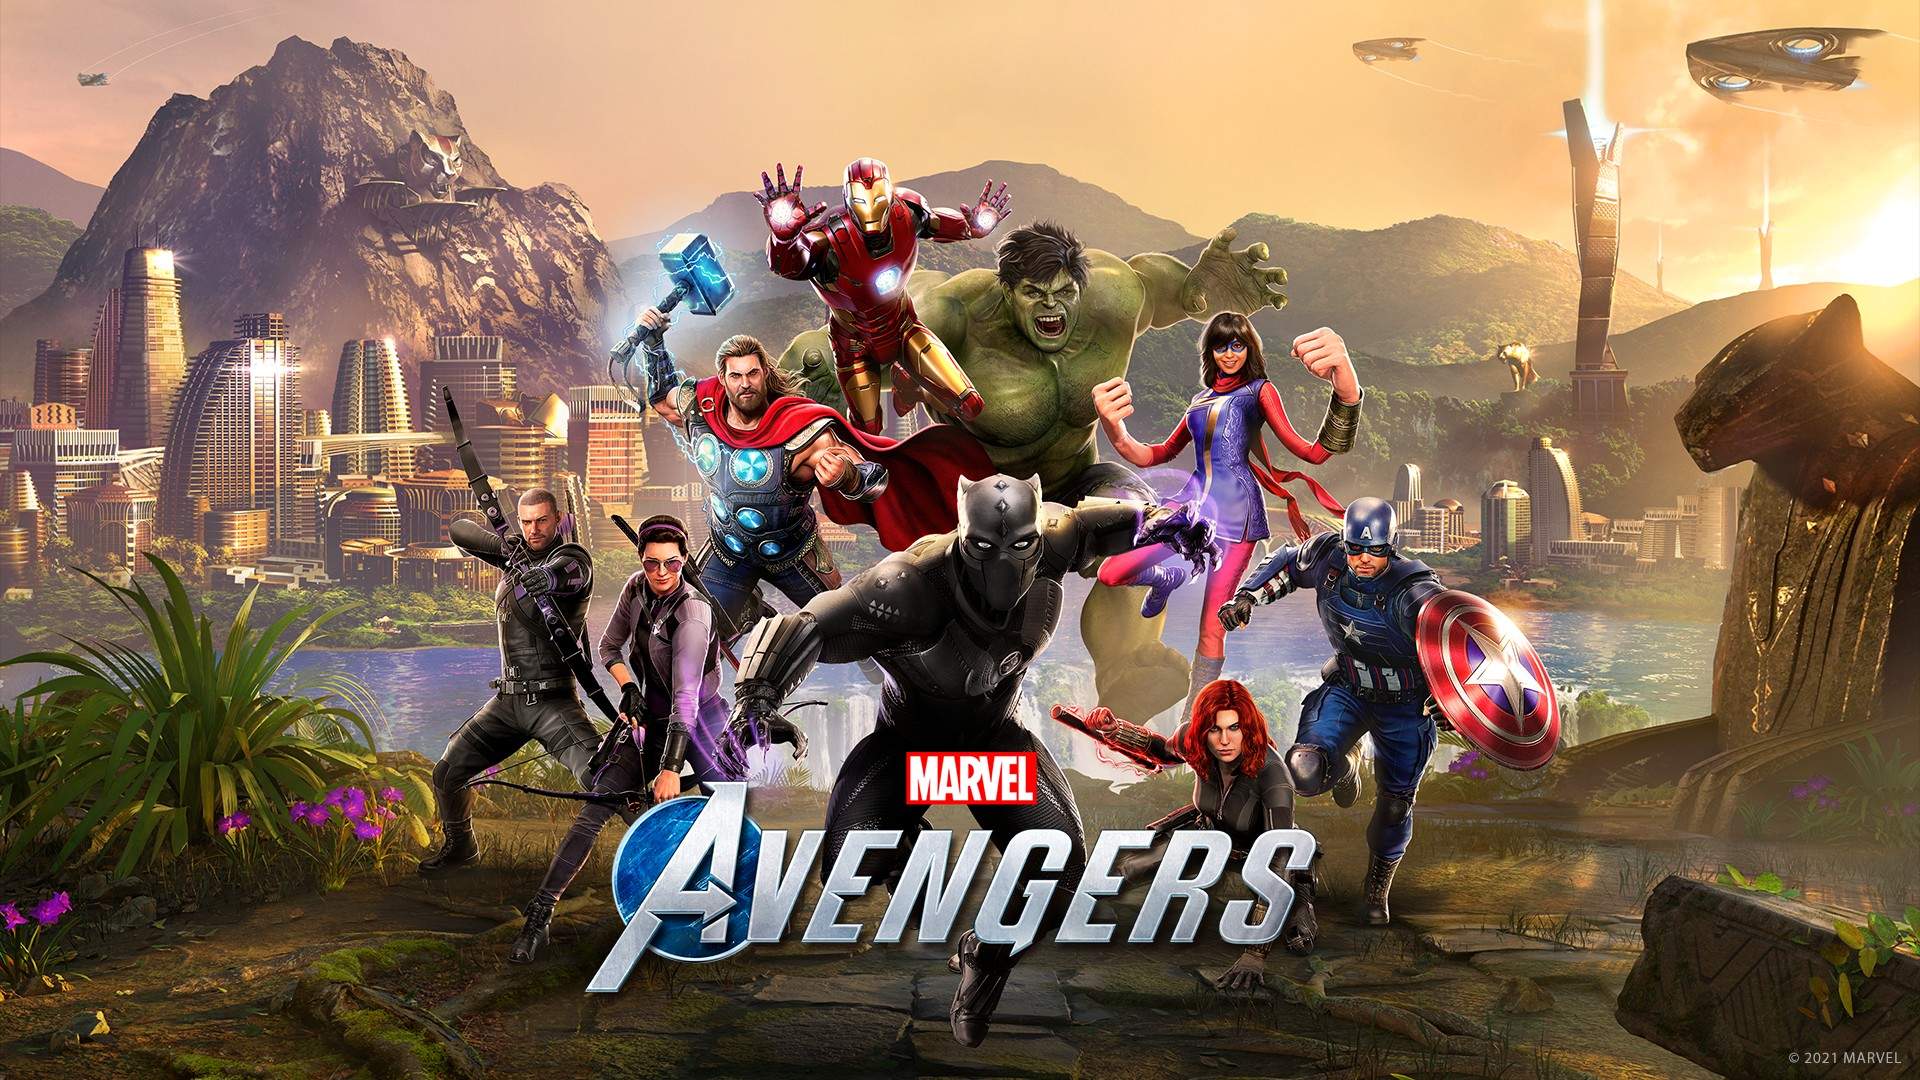 Xbox Game Pass adds Marvel's Avengers on September 30 along with all post-launch DLCs